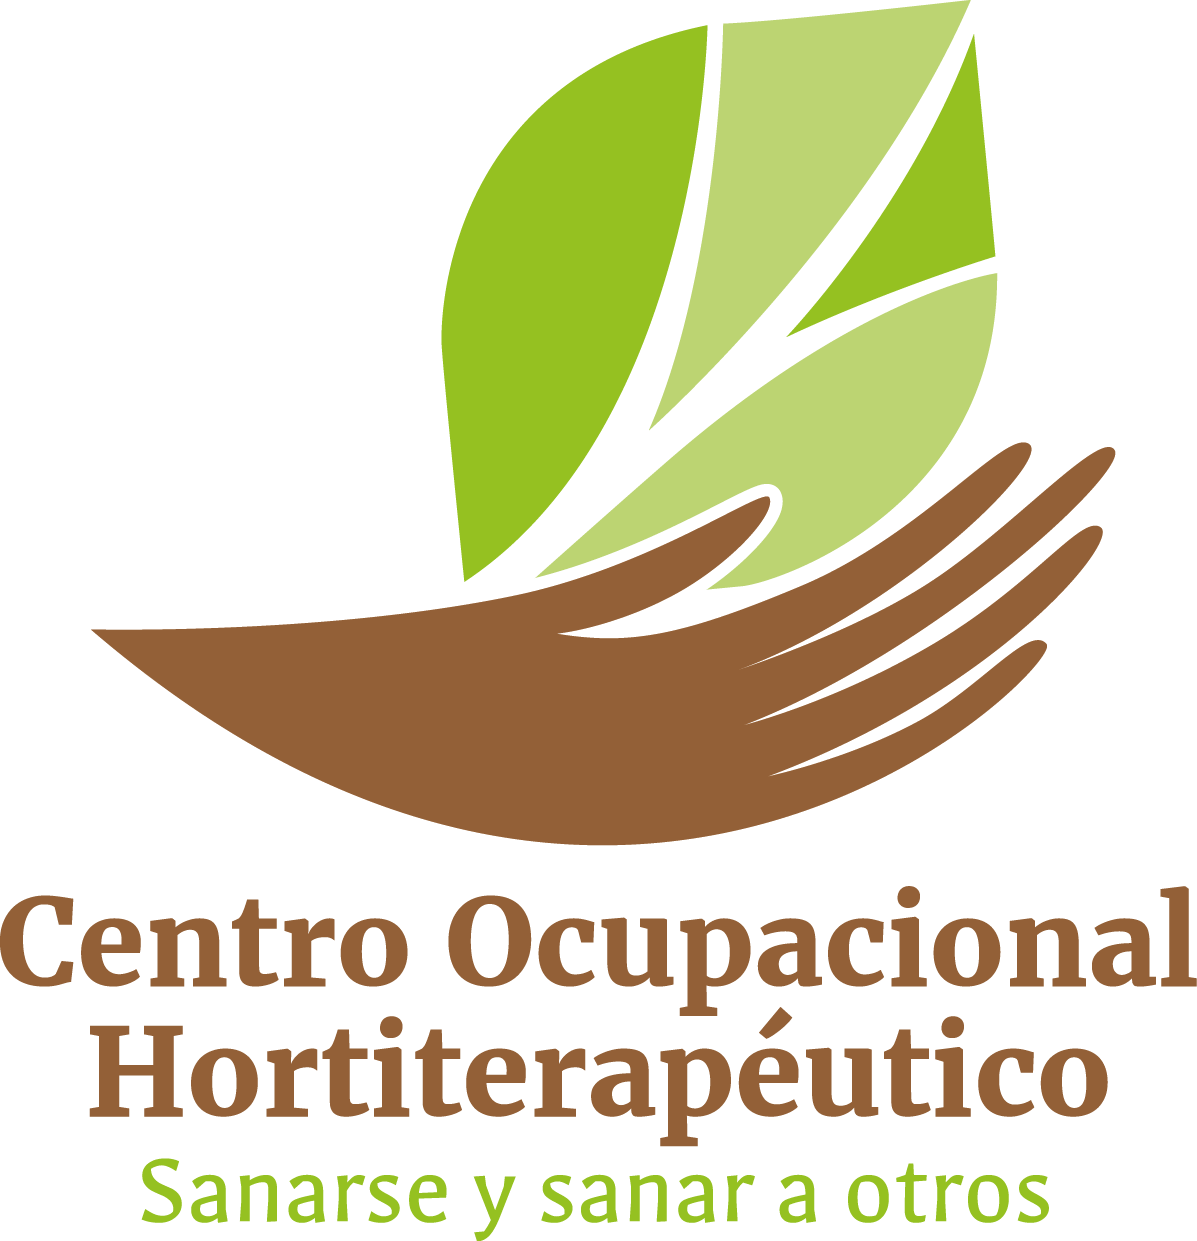 You are currently viewing Fondacio in Chile COH: Medicinal plants at home.